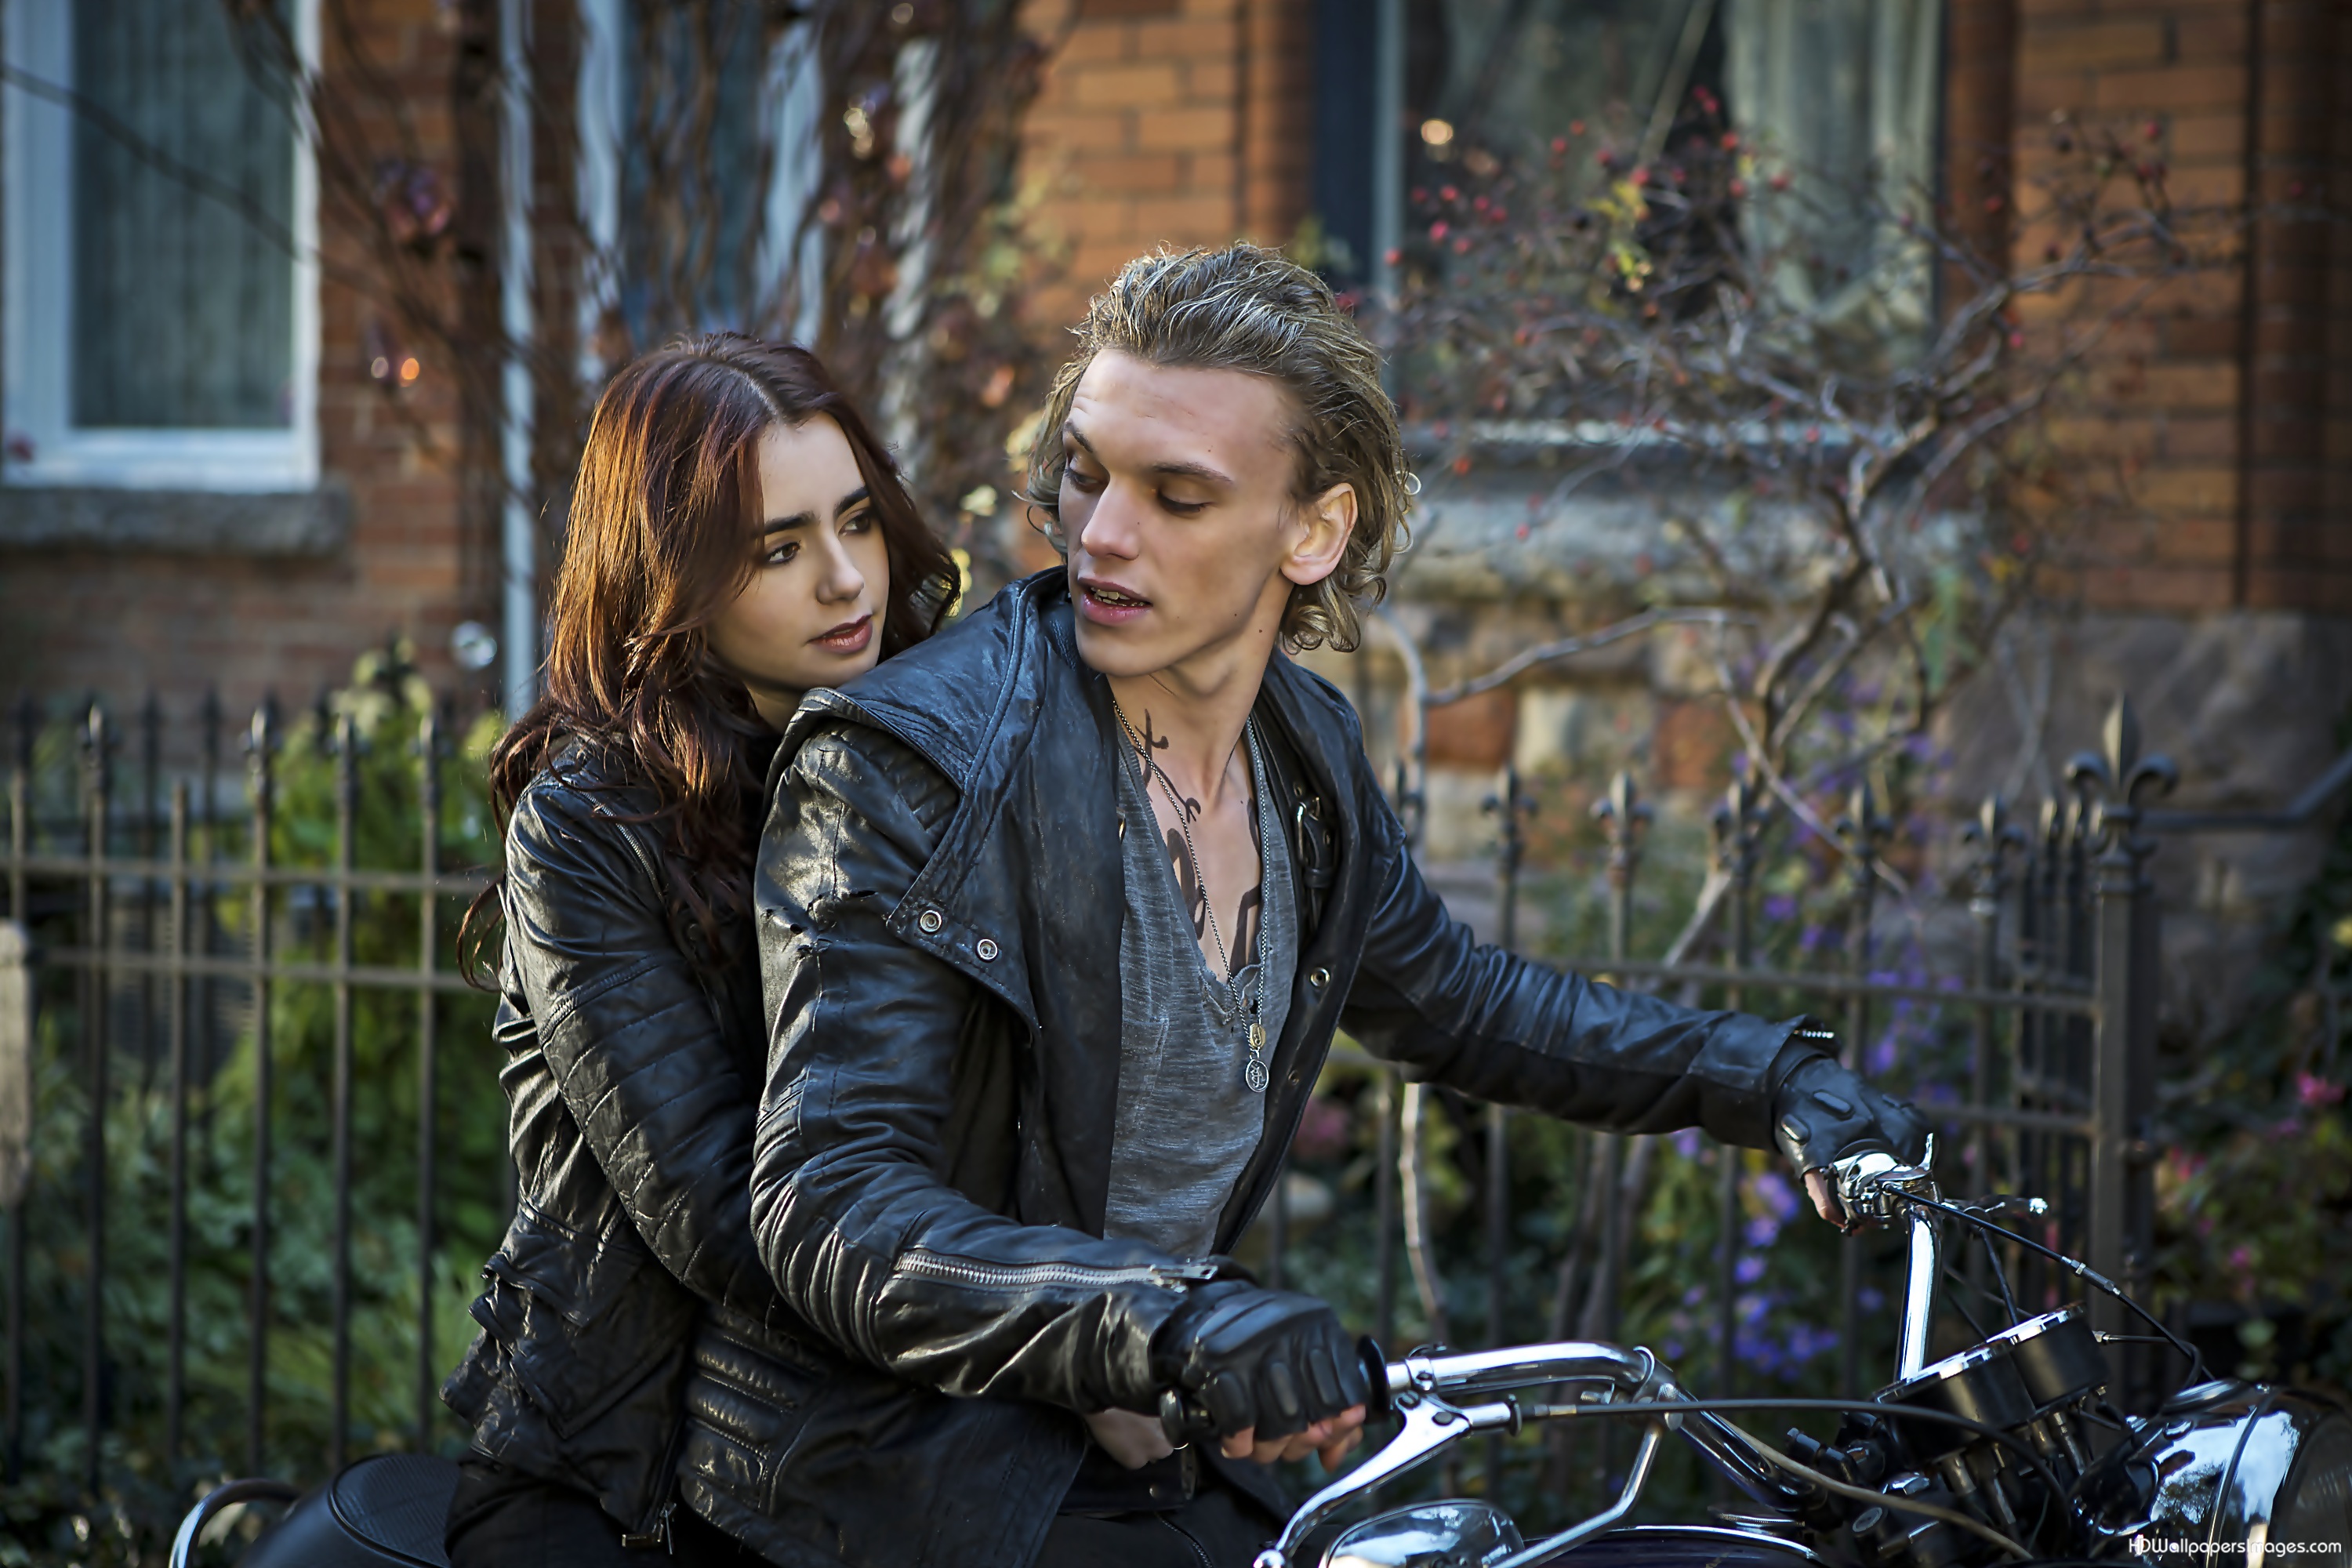 Amazing The Mortal Instruments: City Of Bones Pictures & Backgrounds